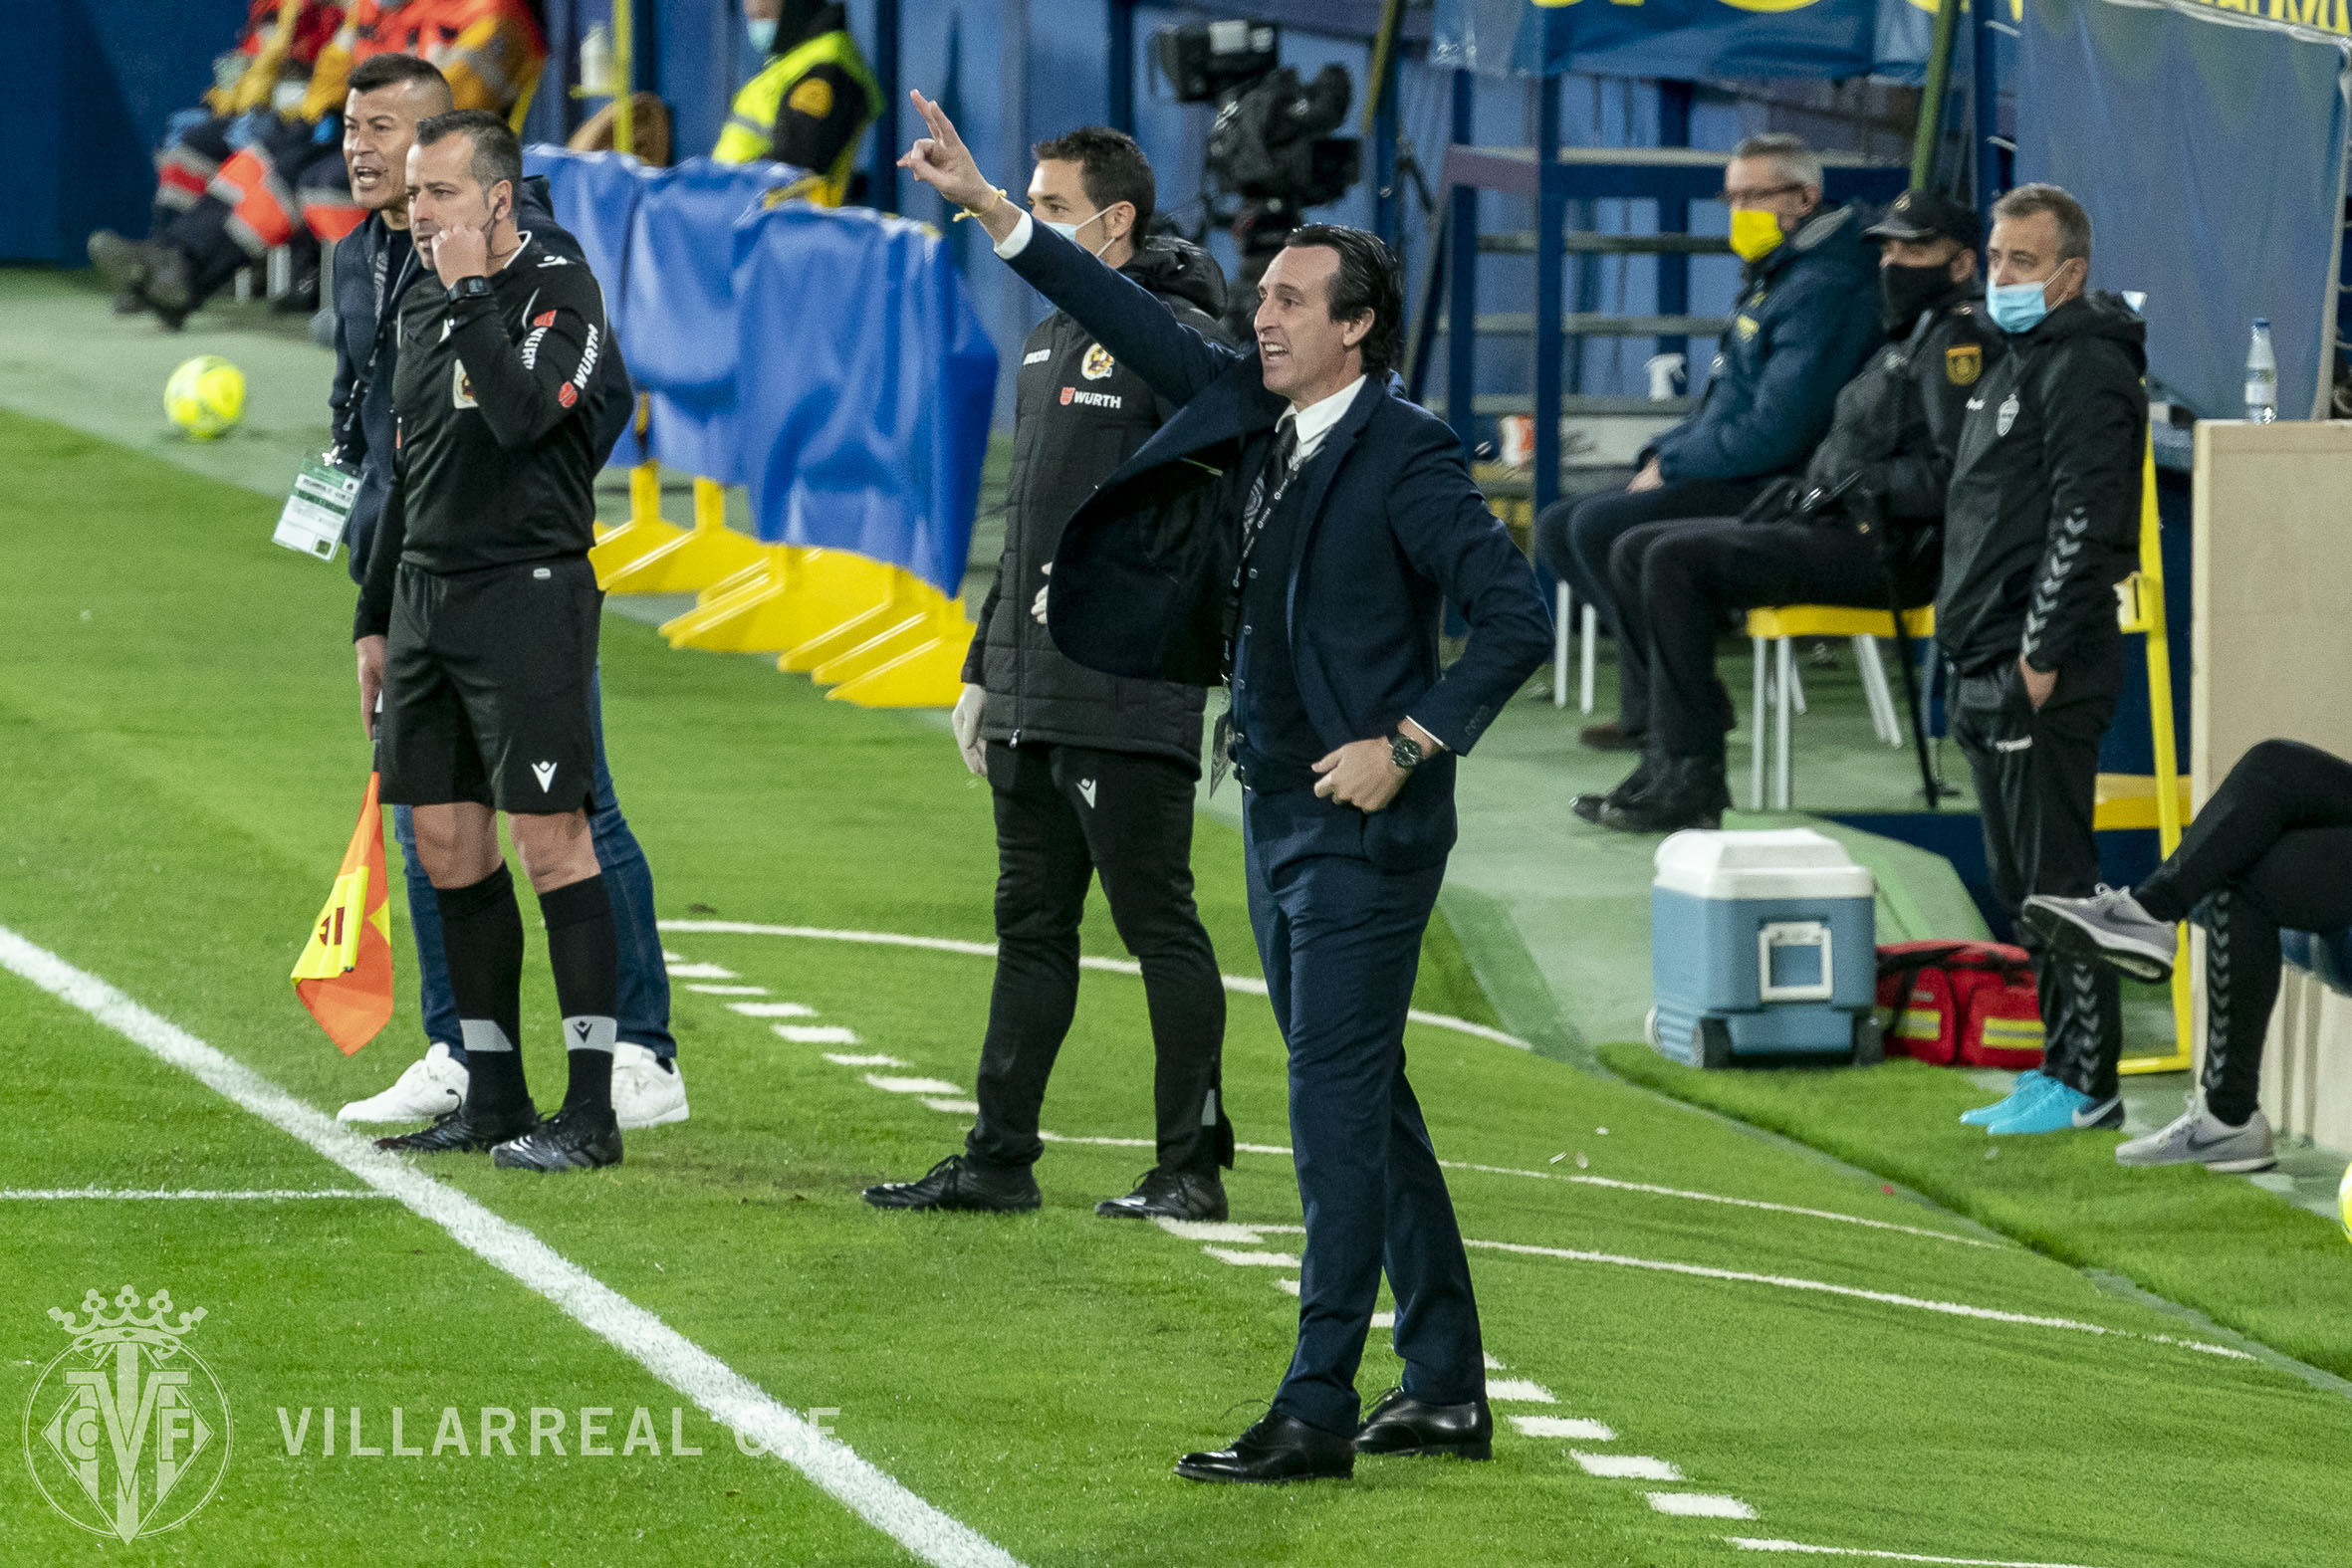 Villarreal and Athletic Club unable to be separated at La Ceramica